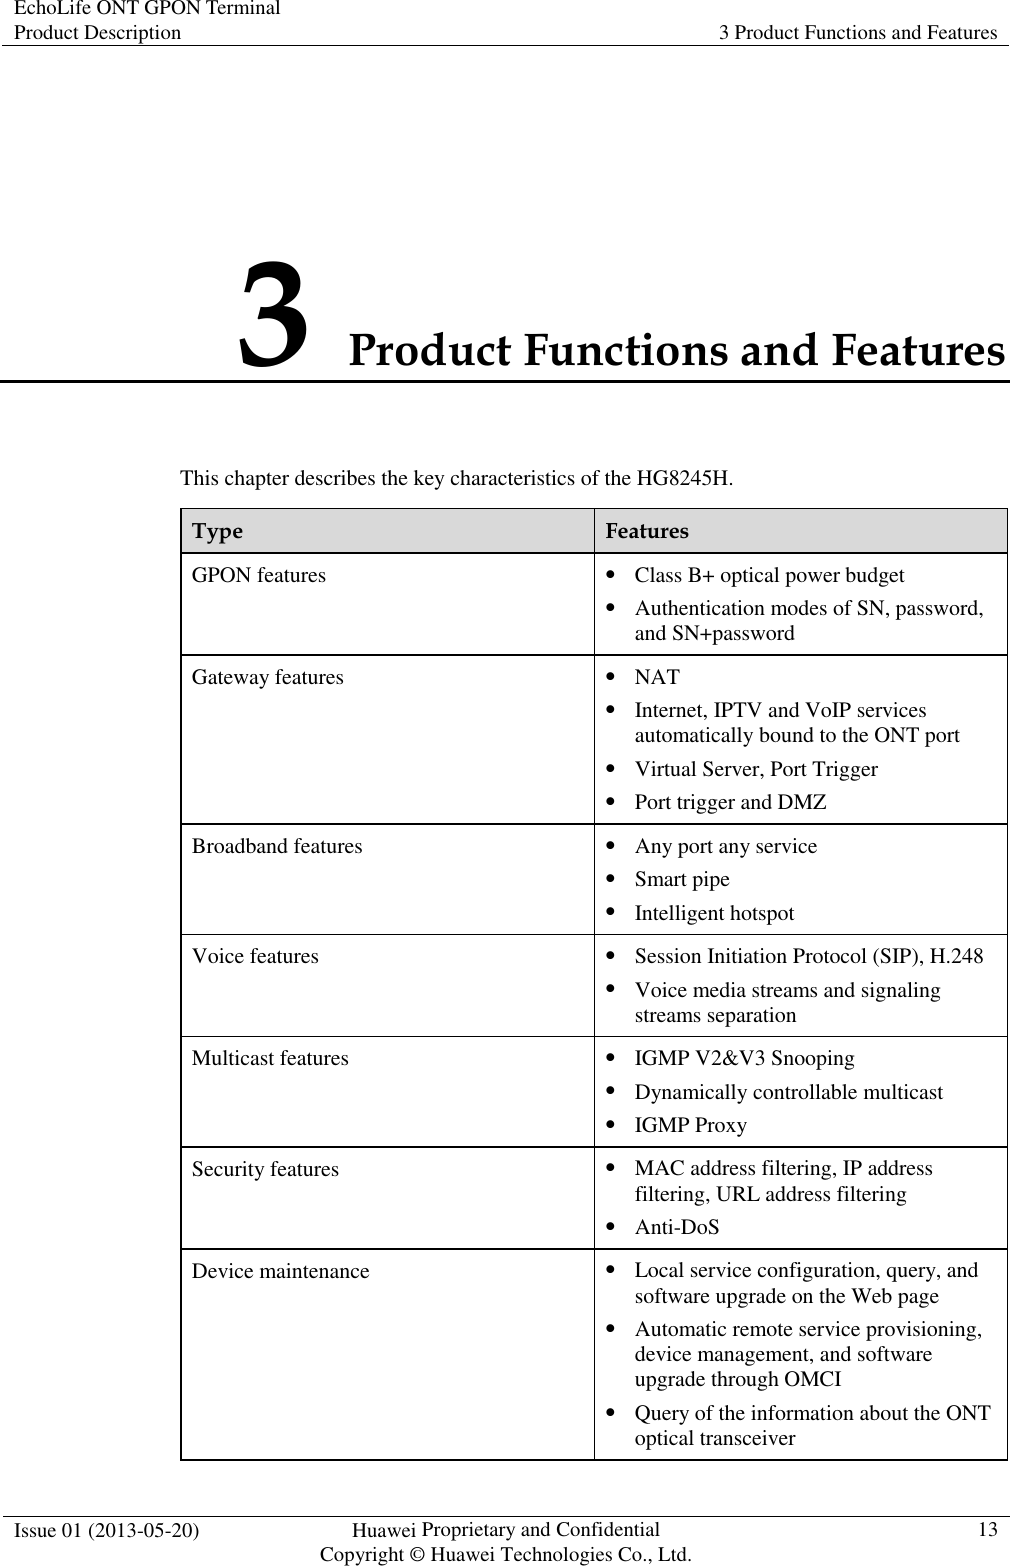 EchoLife ONT GPON Terminal Product Description  3 Product Functions and Features  Issue 01 (2013-05-20)  Huawei Proprietary and Confidential                                     Copyright © Huawei Technologies Co., Ltd. 13  3 Product Functions and Features This chapter describes the key characteristics of the HG8245H. Type  Features GPON features  Class B+ optical power budget  Authentication modes of SN, password, and SN+password Gateway features  NAT  Internet, IPTV and VoIP services automatically bound to the ONT port  Virtual Server, Port Trigger  Port trigger and DMZ Broadband features  Any port any service  Smart pipe  Intelligent hotspot Voice features  Session Initiation Protocol (SIP), H.248  Voice media streams and signaling streams separation Multicast features  IGMP V2&amp;V3 Snooping  Dynamically controllable multicast  IGMP Proxy Security features  MAC address filtering, IP address filtering, URL address filtering  Anti-DoS Device maintenance  Local service configuration, query, and software upgrade on the Web page  Automatic remote service provisioning, device management, and software upgrade through OMCI  Query of the information about the ONT optical transceiver 